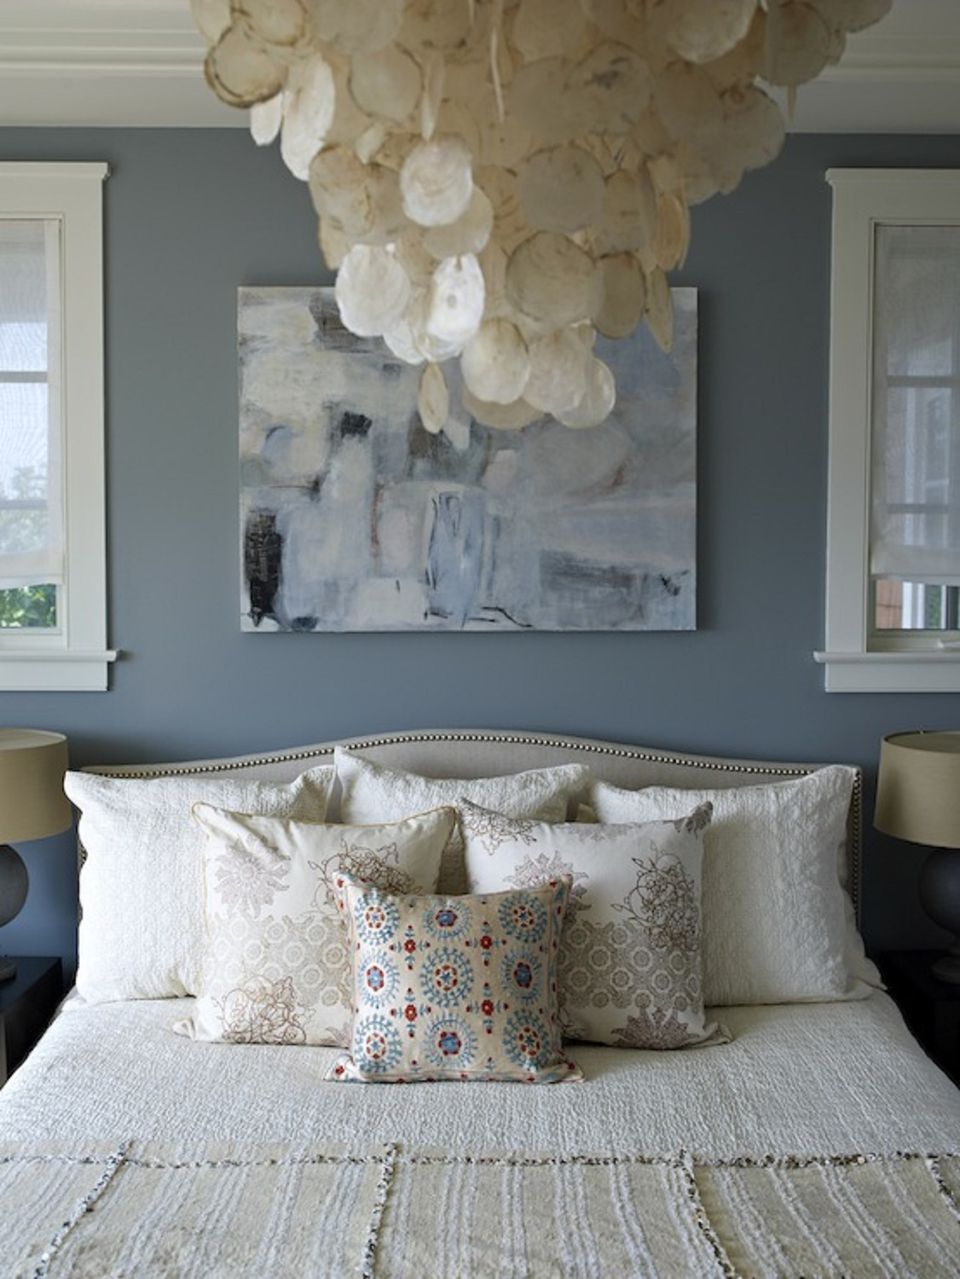 Teal And Gray Bedroom